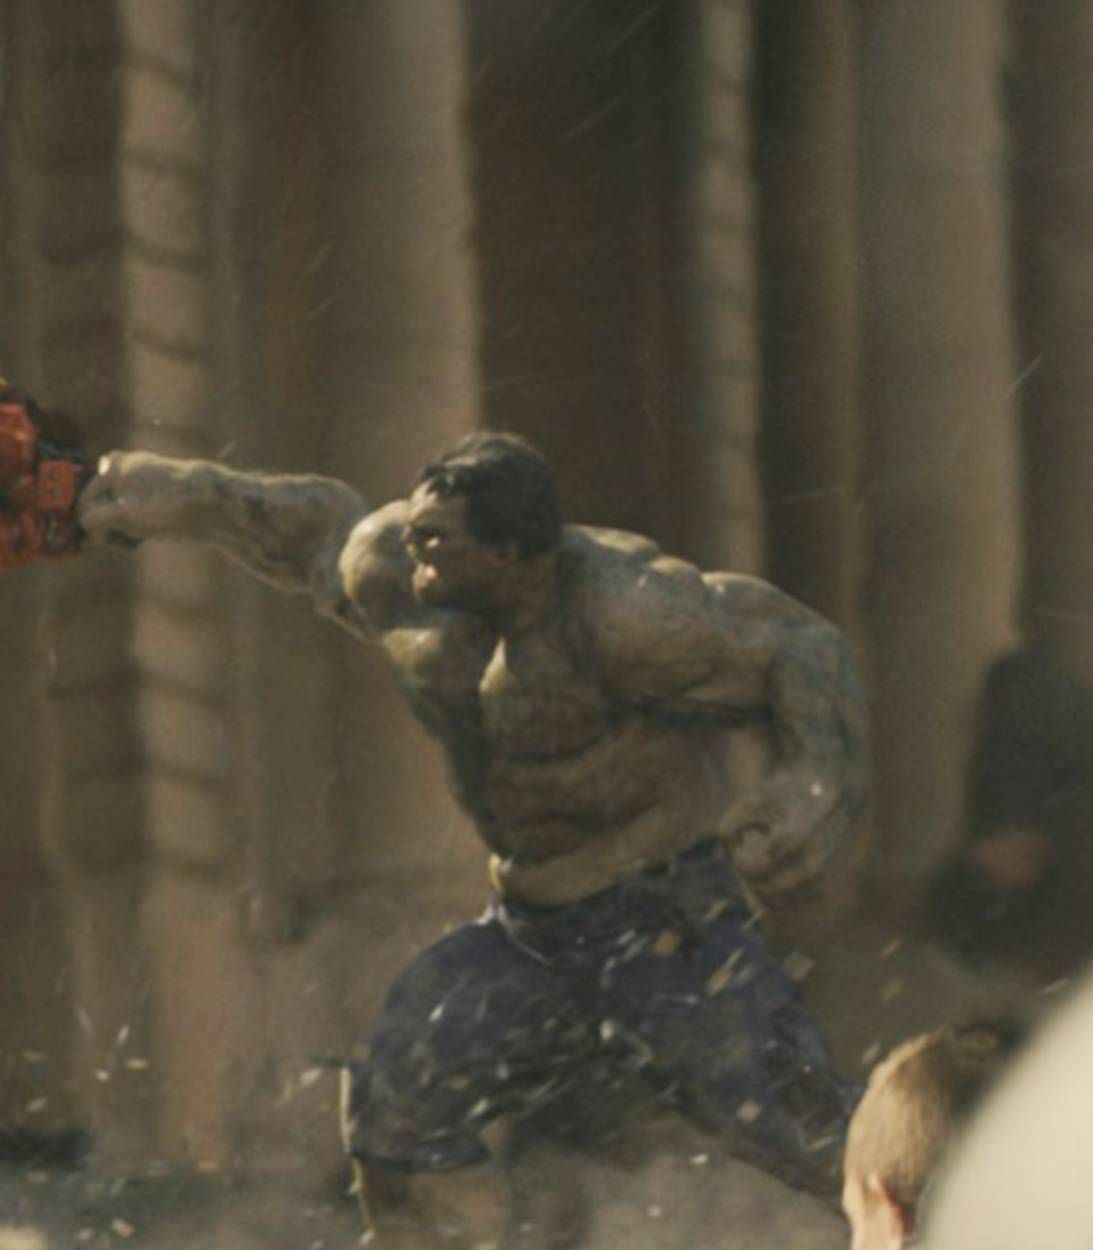 Hulk in Avengers Age of Ultron pic vertical